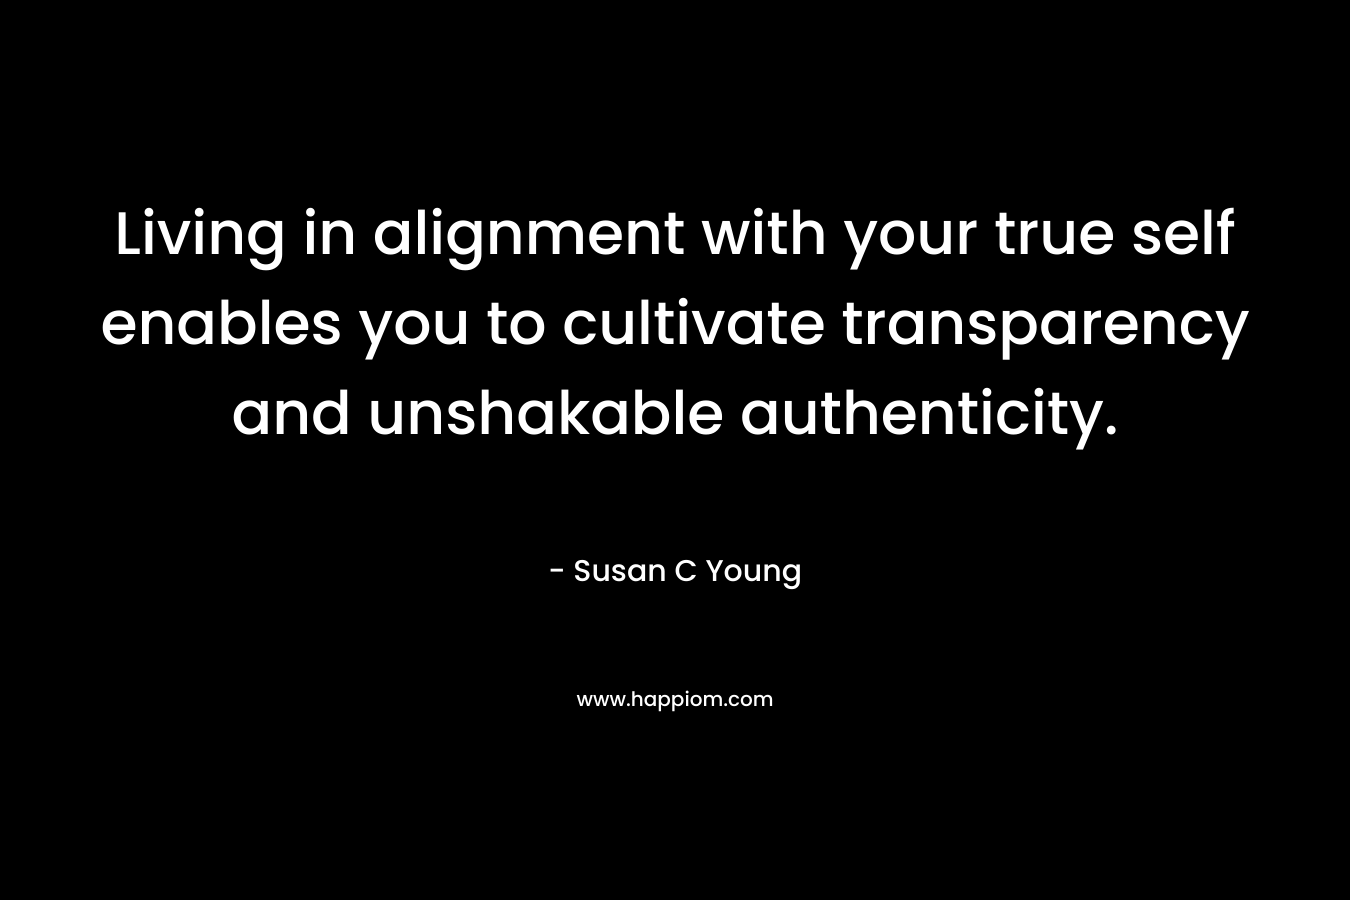 Living in alignment with your true self enables you to cultivate transparency and unshakable authenticity.